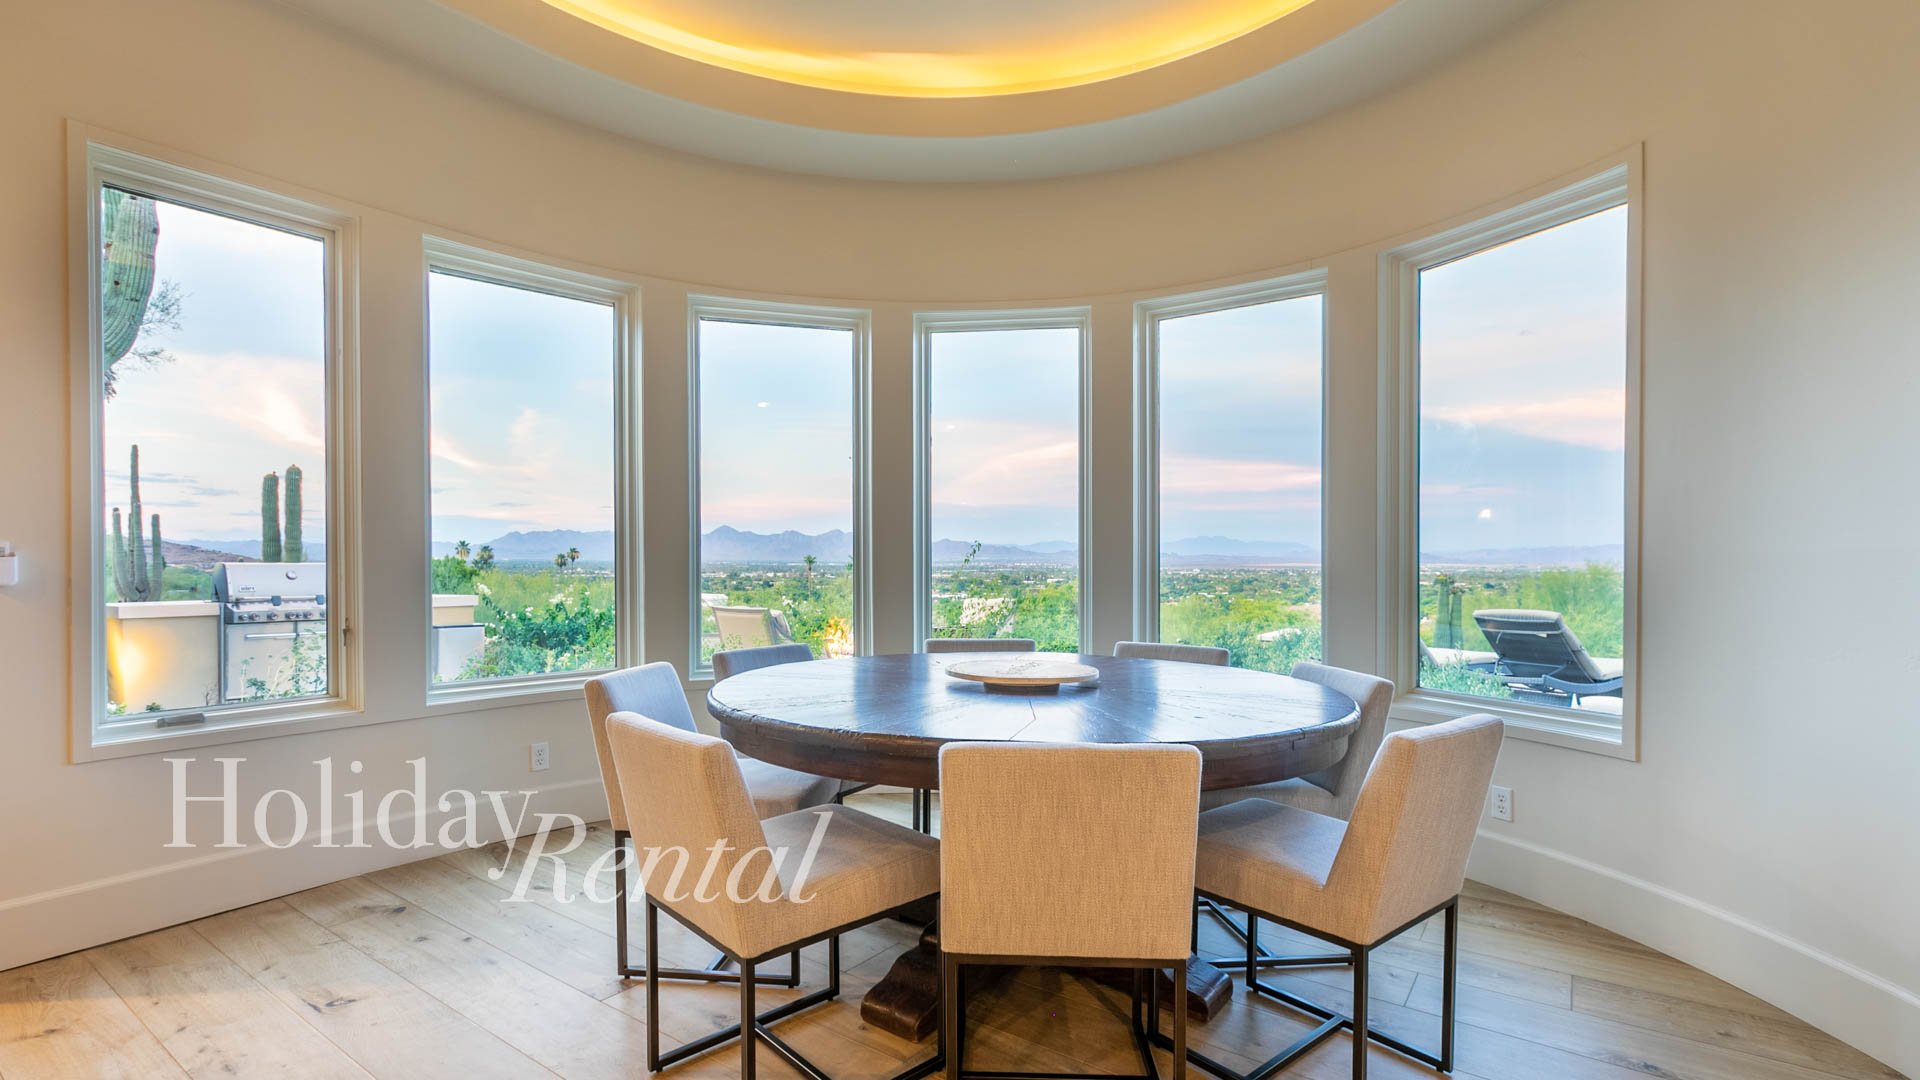 Dining table with views